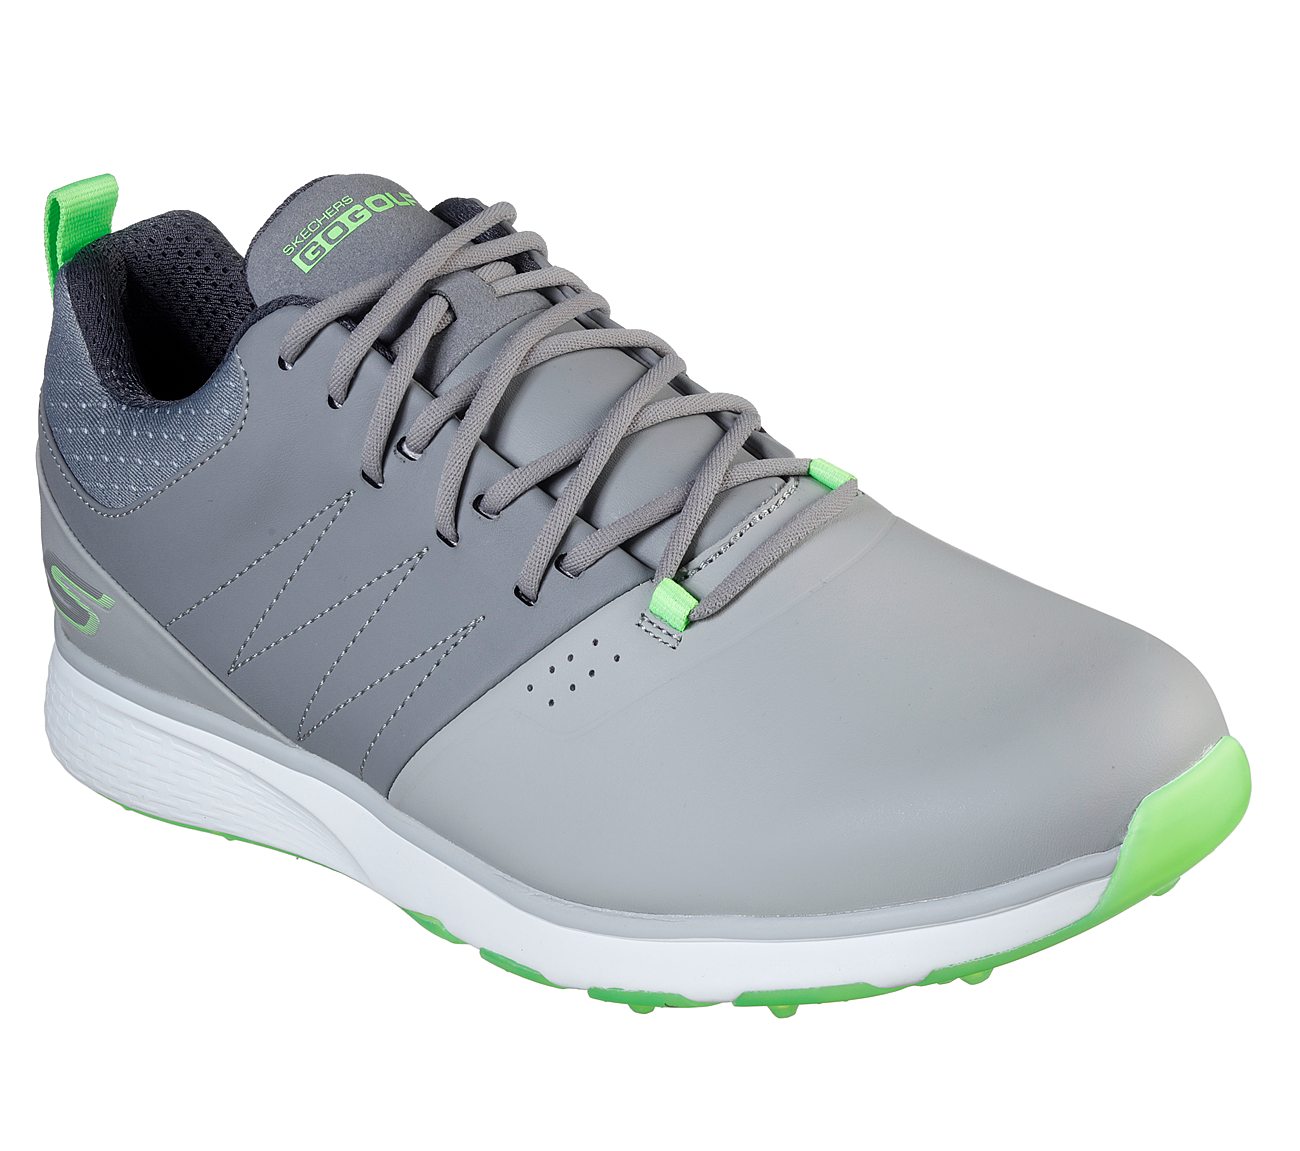 cheapest skechers golf shoes